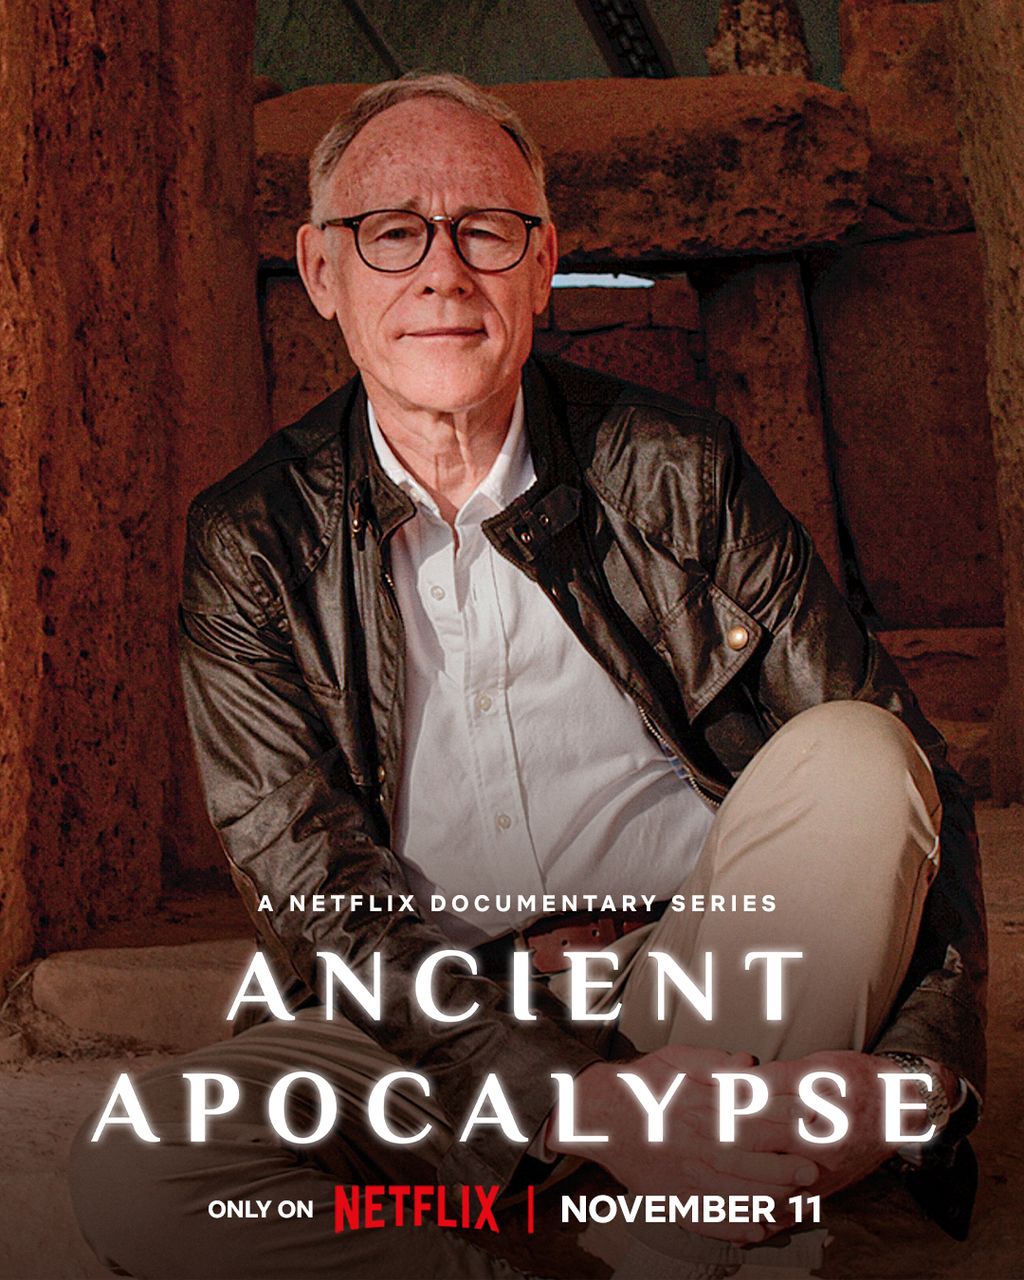 Ancient Apocalypse on Netflix everything you need to know What to Watch